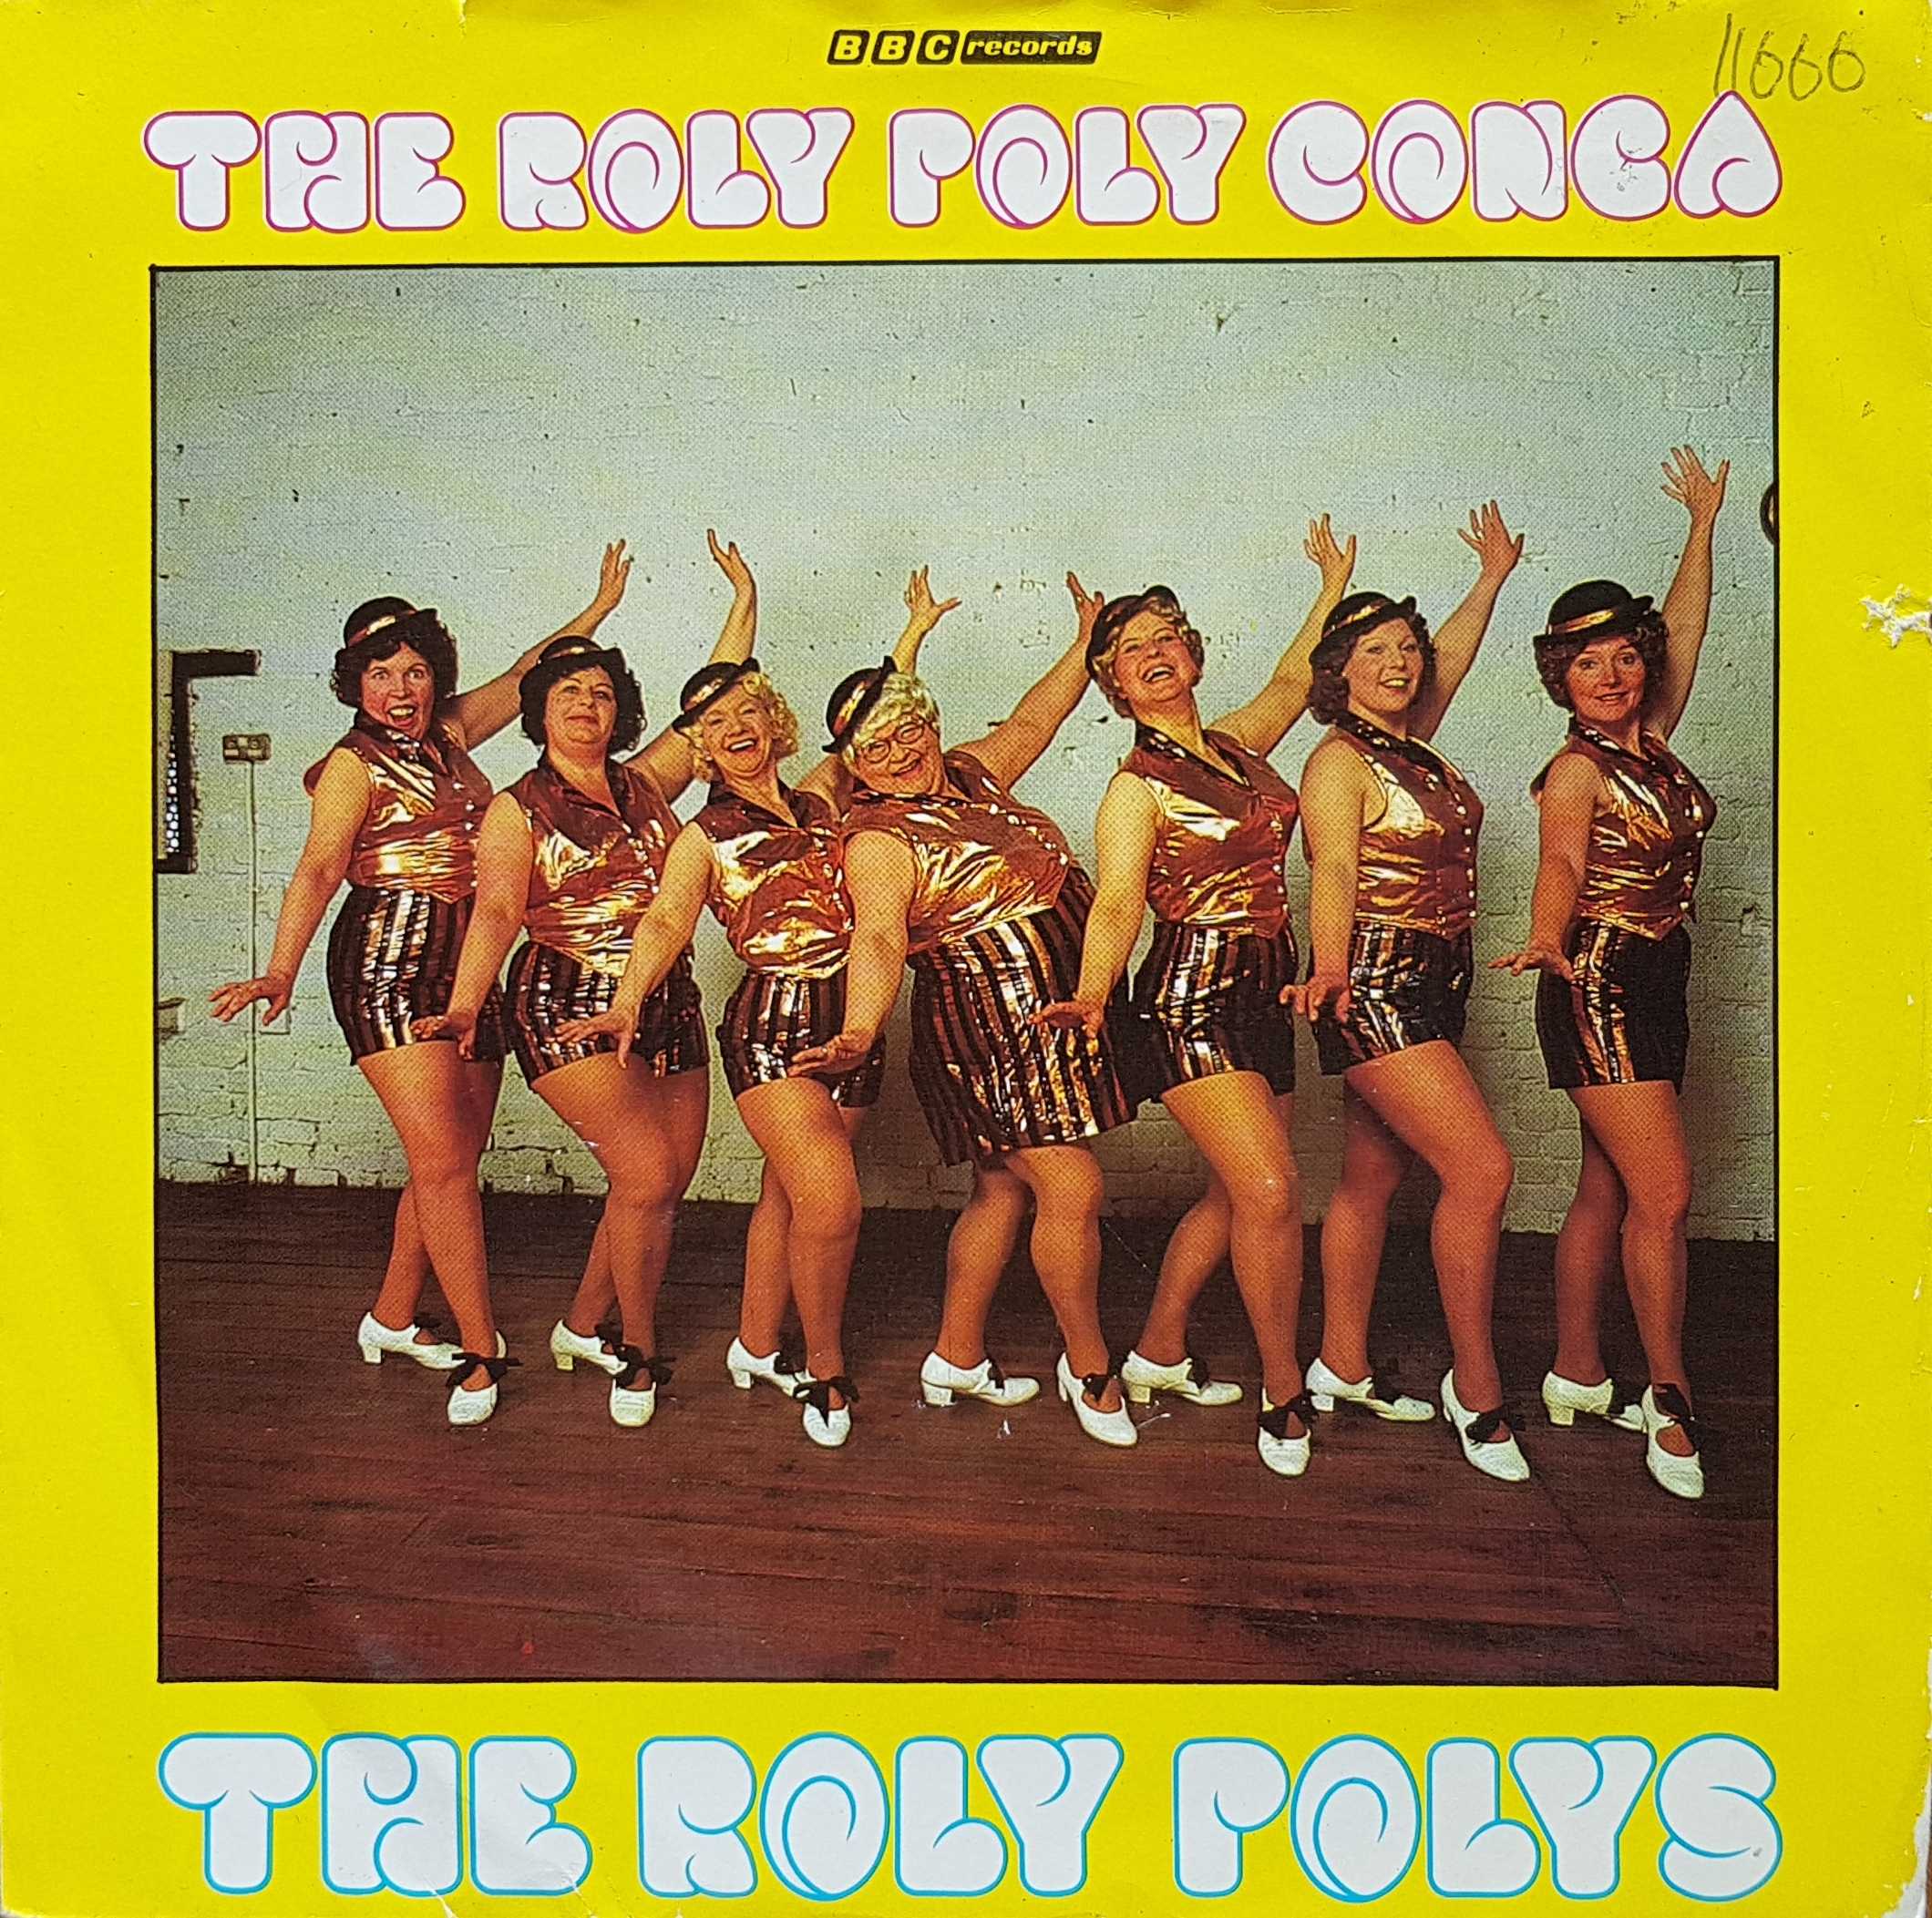 Picture of RESL 139 The roly poly conga by artist The Roly Polys from the BBC singles - Records and Tapes library